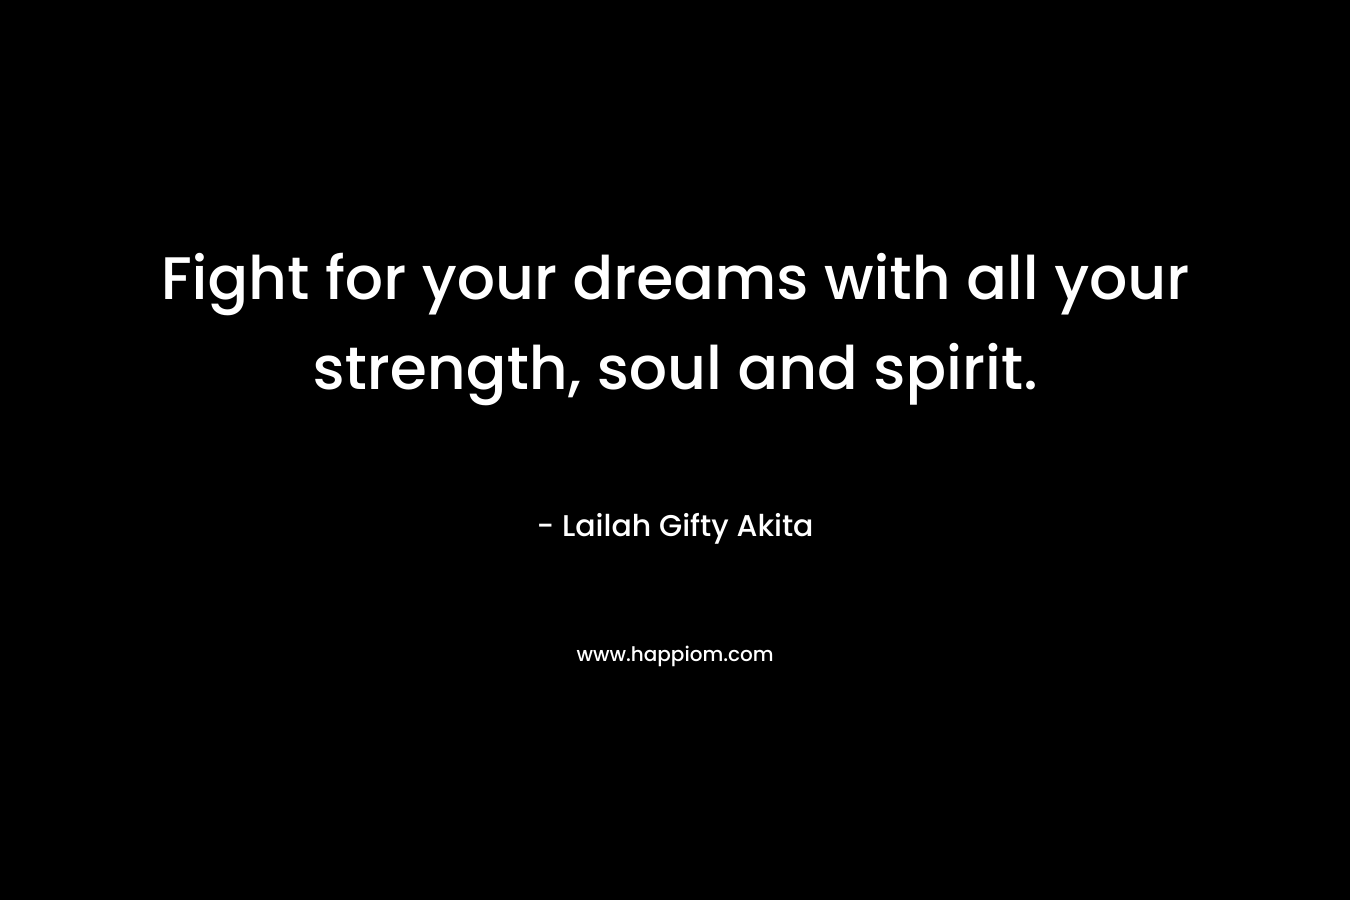 Fight for your dreams with all your strength, soul and spirit.